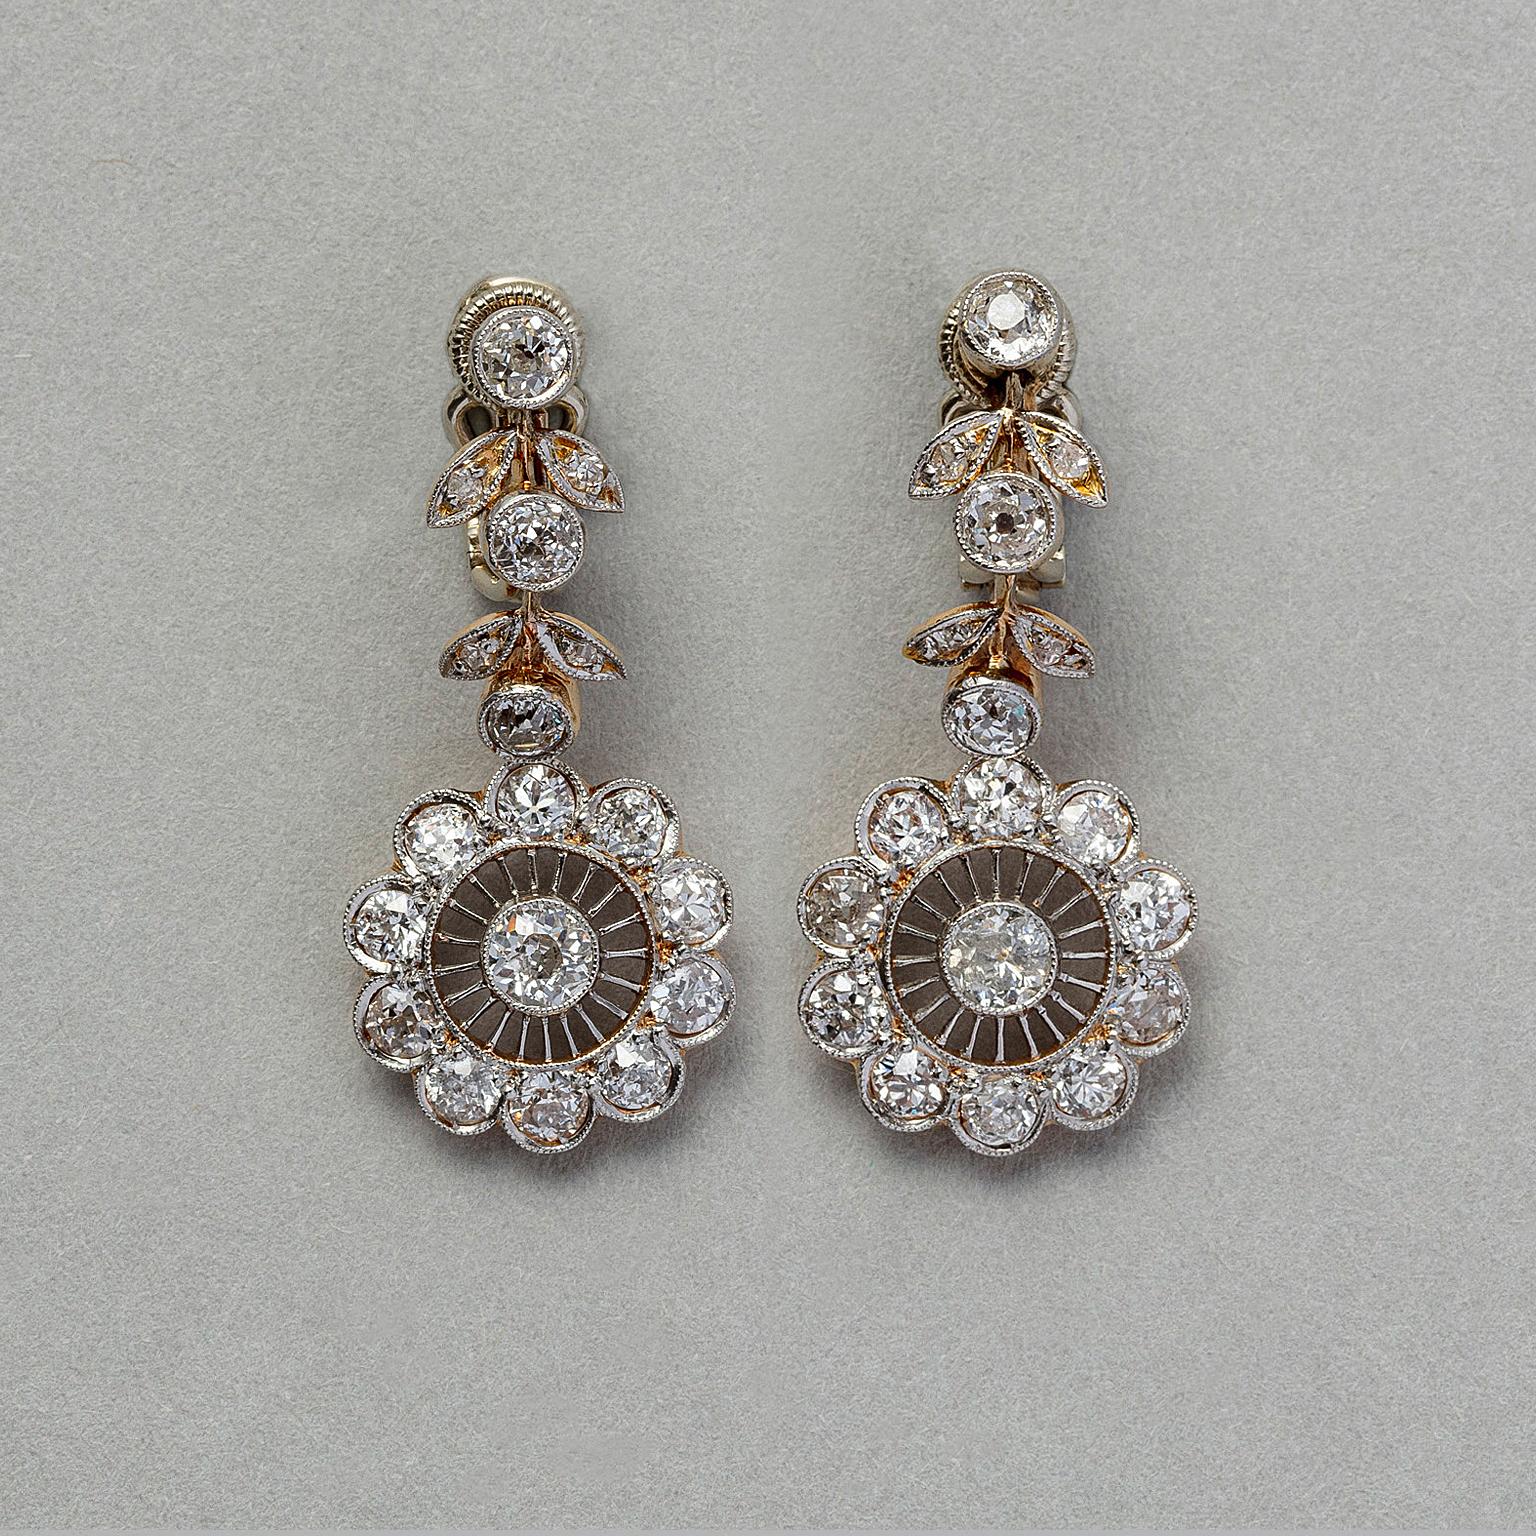 A pair of yellow gold and diamond earrings with 4 diamond leaves at the top around an old cut diamond. Underneath a flower with 10 smaller diamonds surrounding a center diamond (app, 2 carat), Edwardian 1910.

weight: 8.04 grams
dimensions: 3 x 1.2